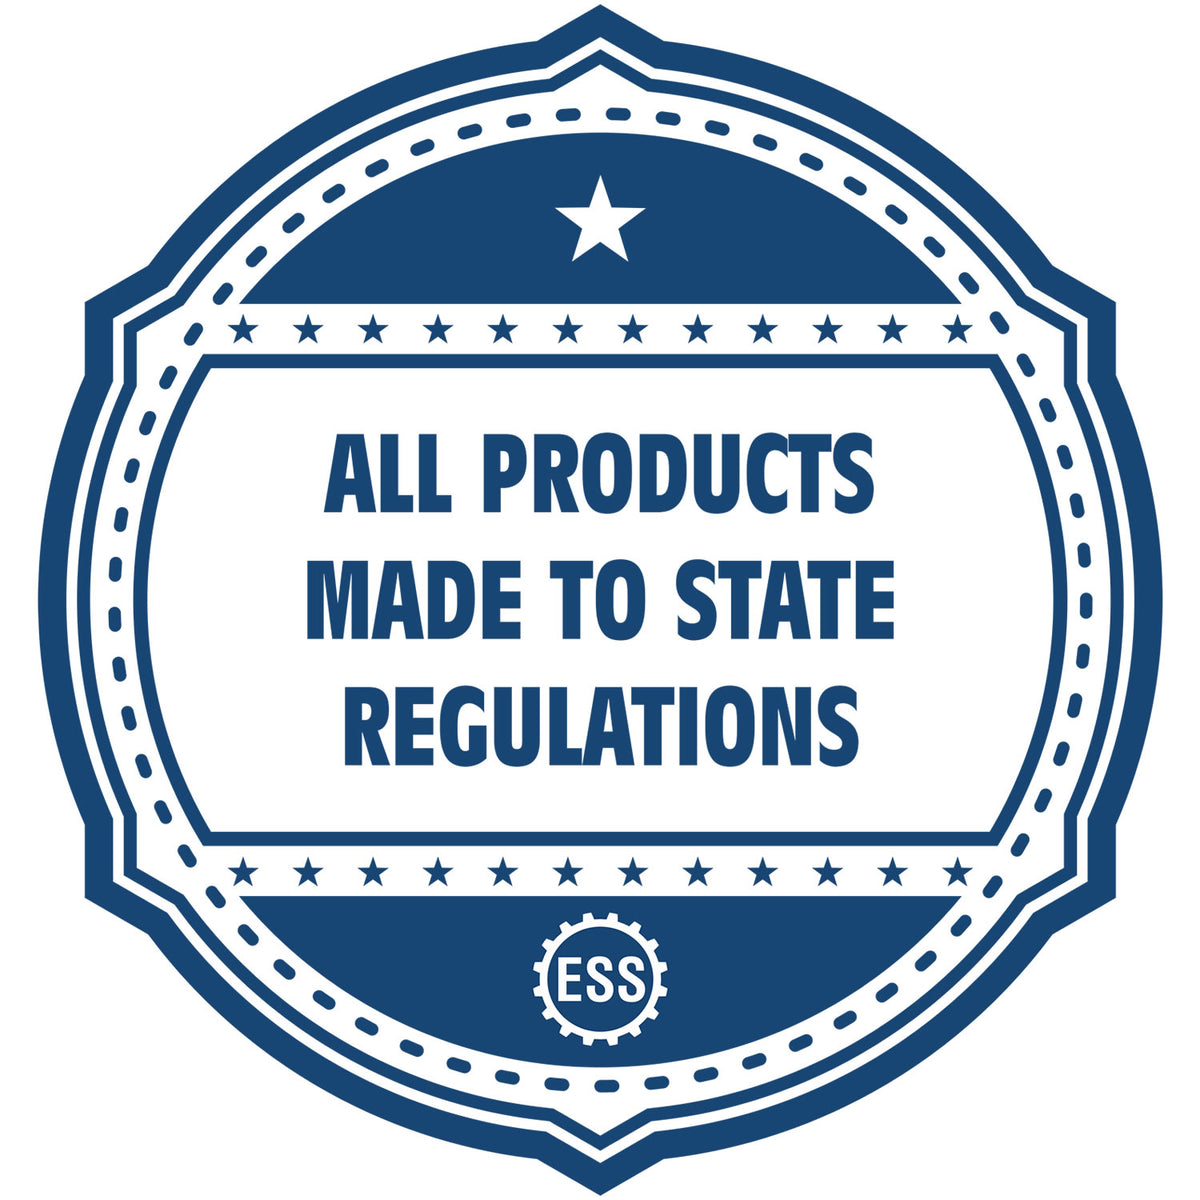 An icon or badge element for the Long Reach Idaho Land Surveyor Seal showing that this product is made in compliance with state regulations.